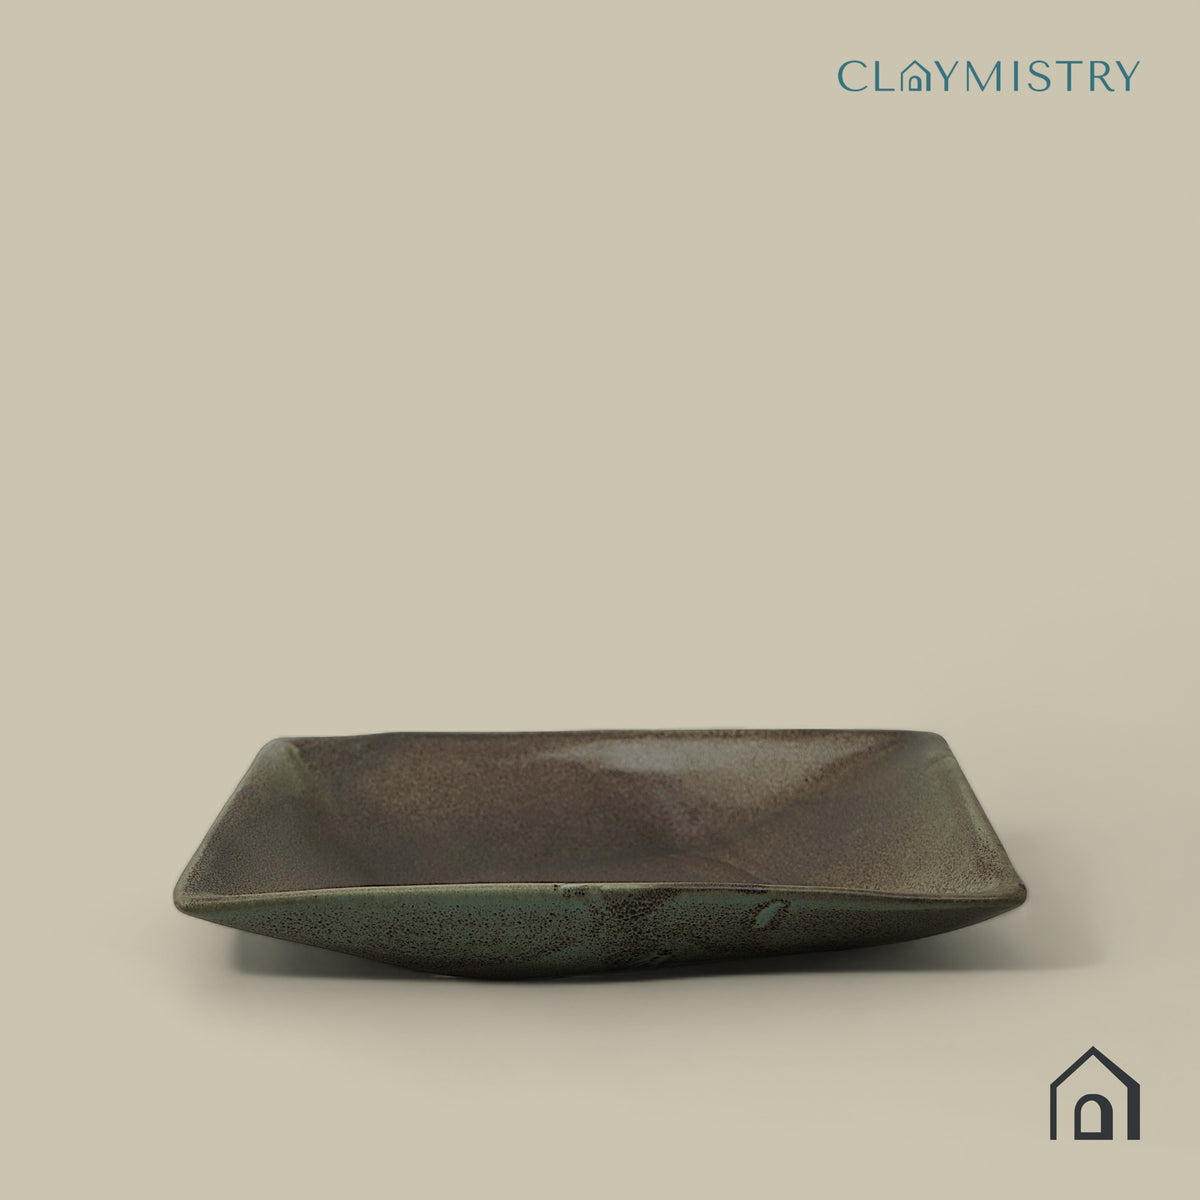 Claymistry Ceramic Snacks Square Shaped Serving Tray | 21cm * 21cm * 3cm | Matte Finish | Dishwasher, Oven & Microwave Safe | Biscuits, Namkeen, Chips, Sweets Tray | Premium Kitchen Crockery